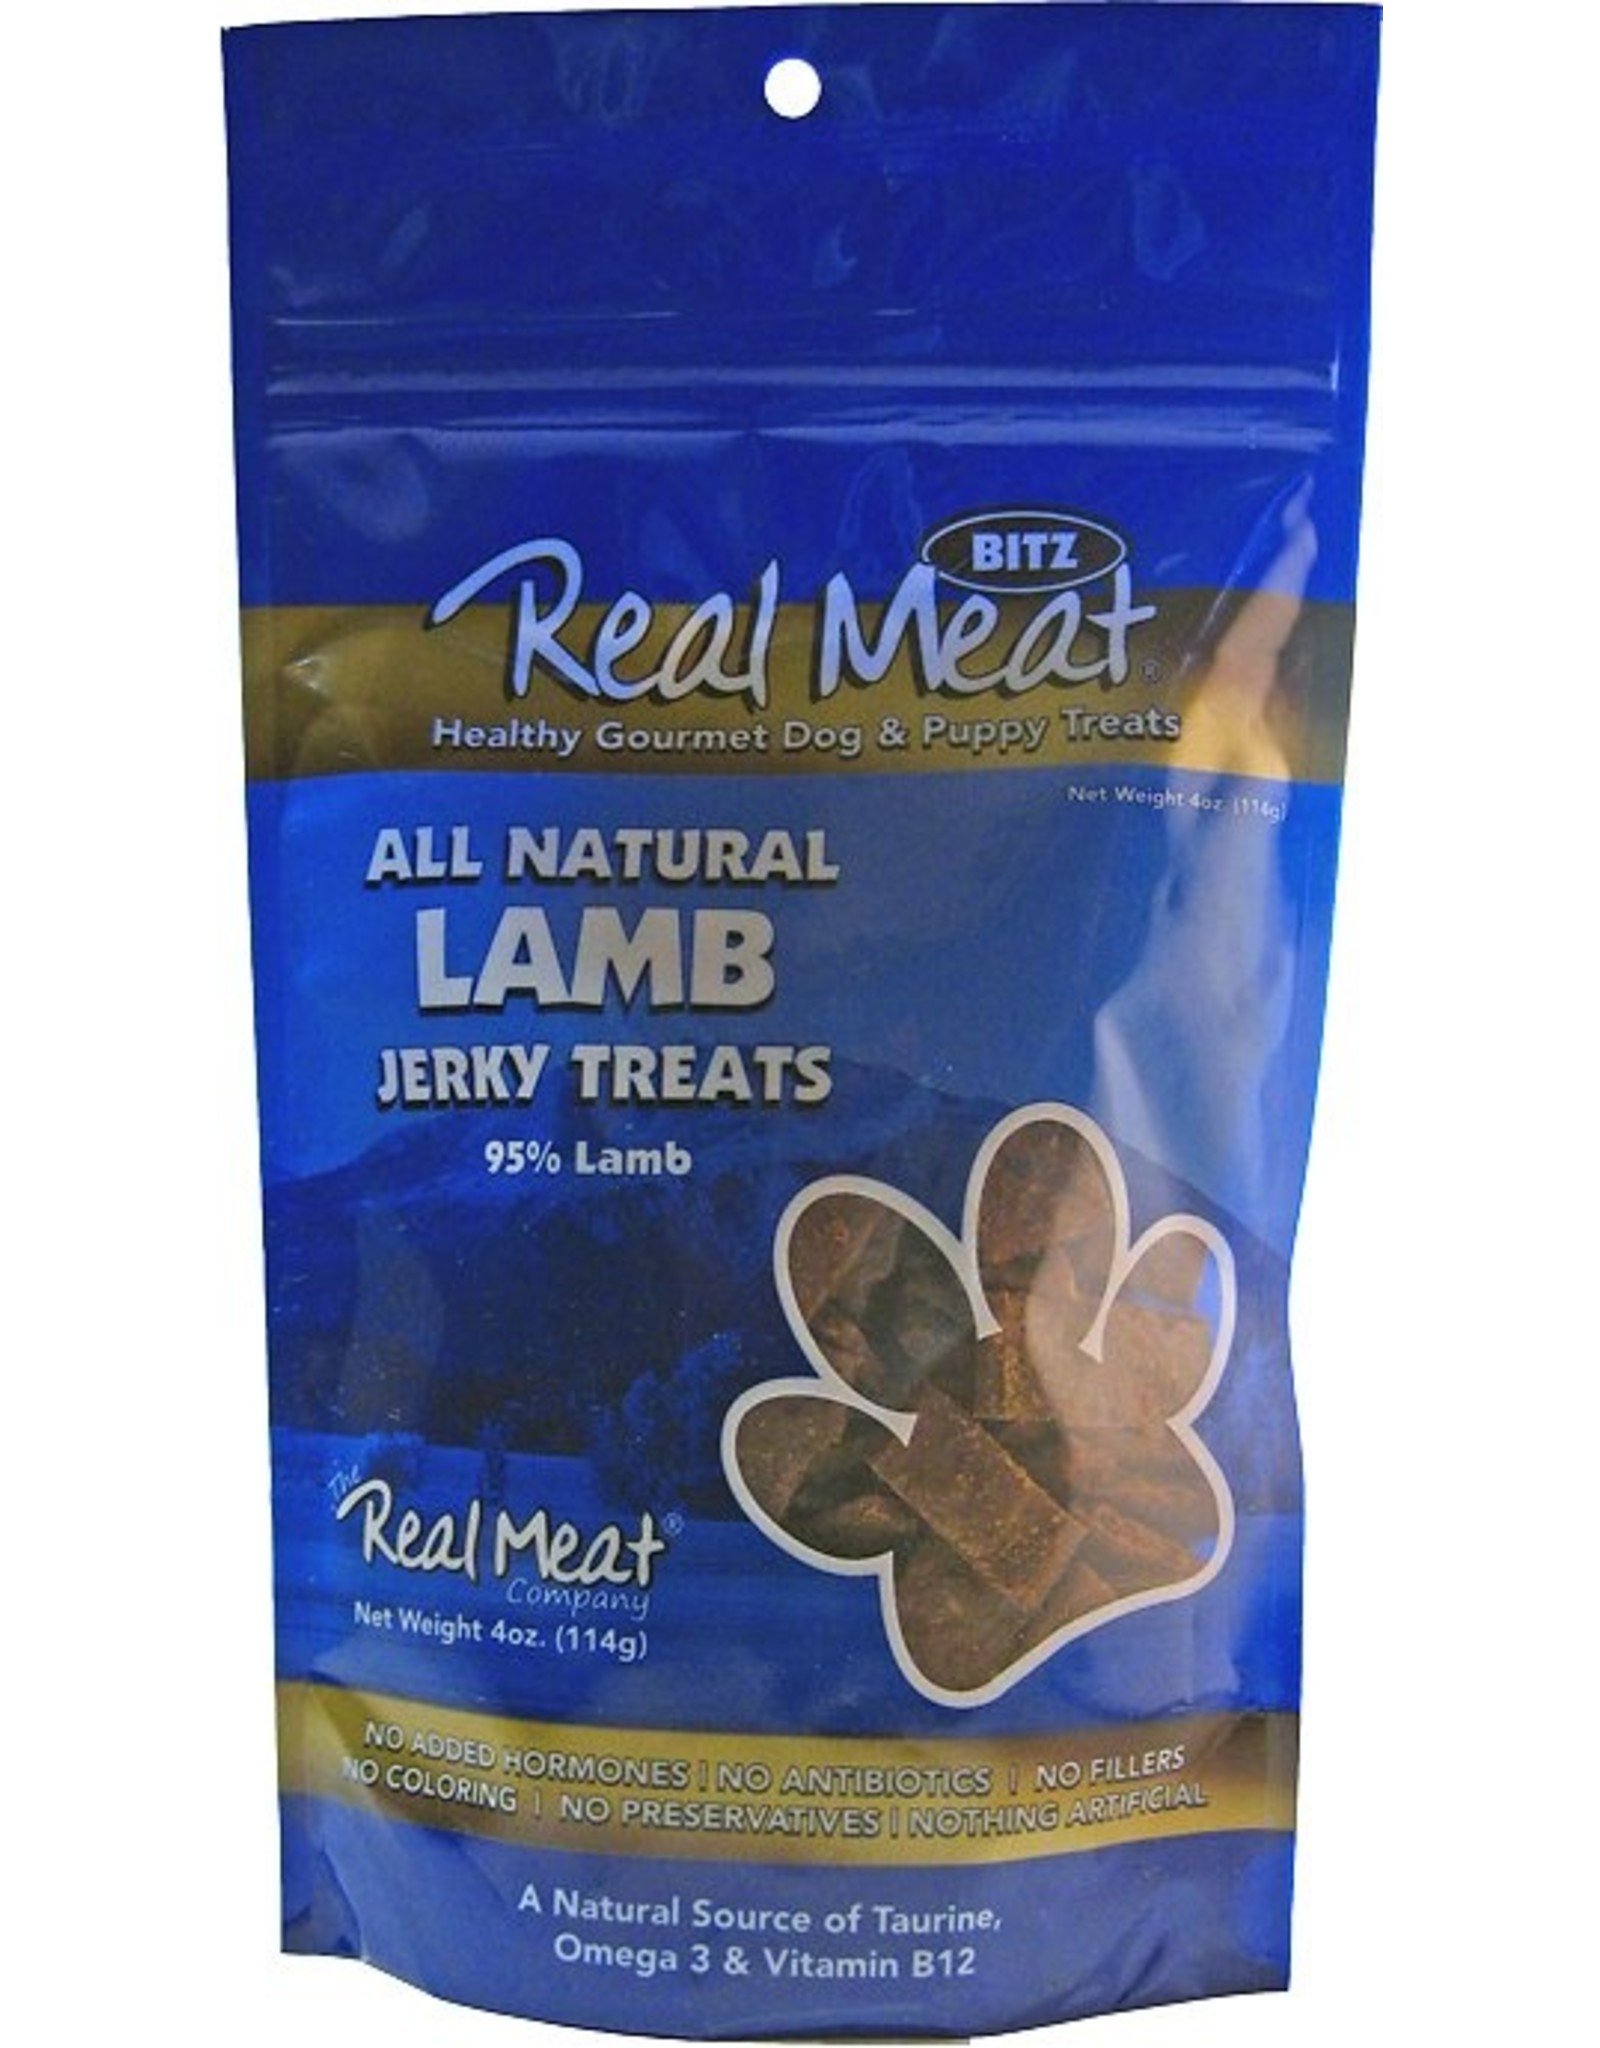 The Real Meat Company The Real Meat Dog Treats Lamb